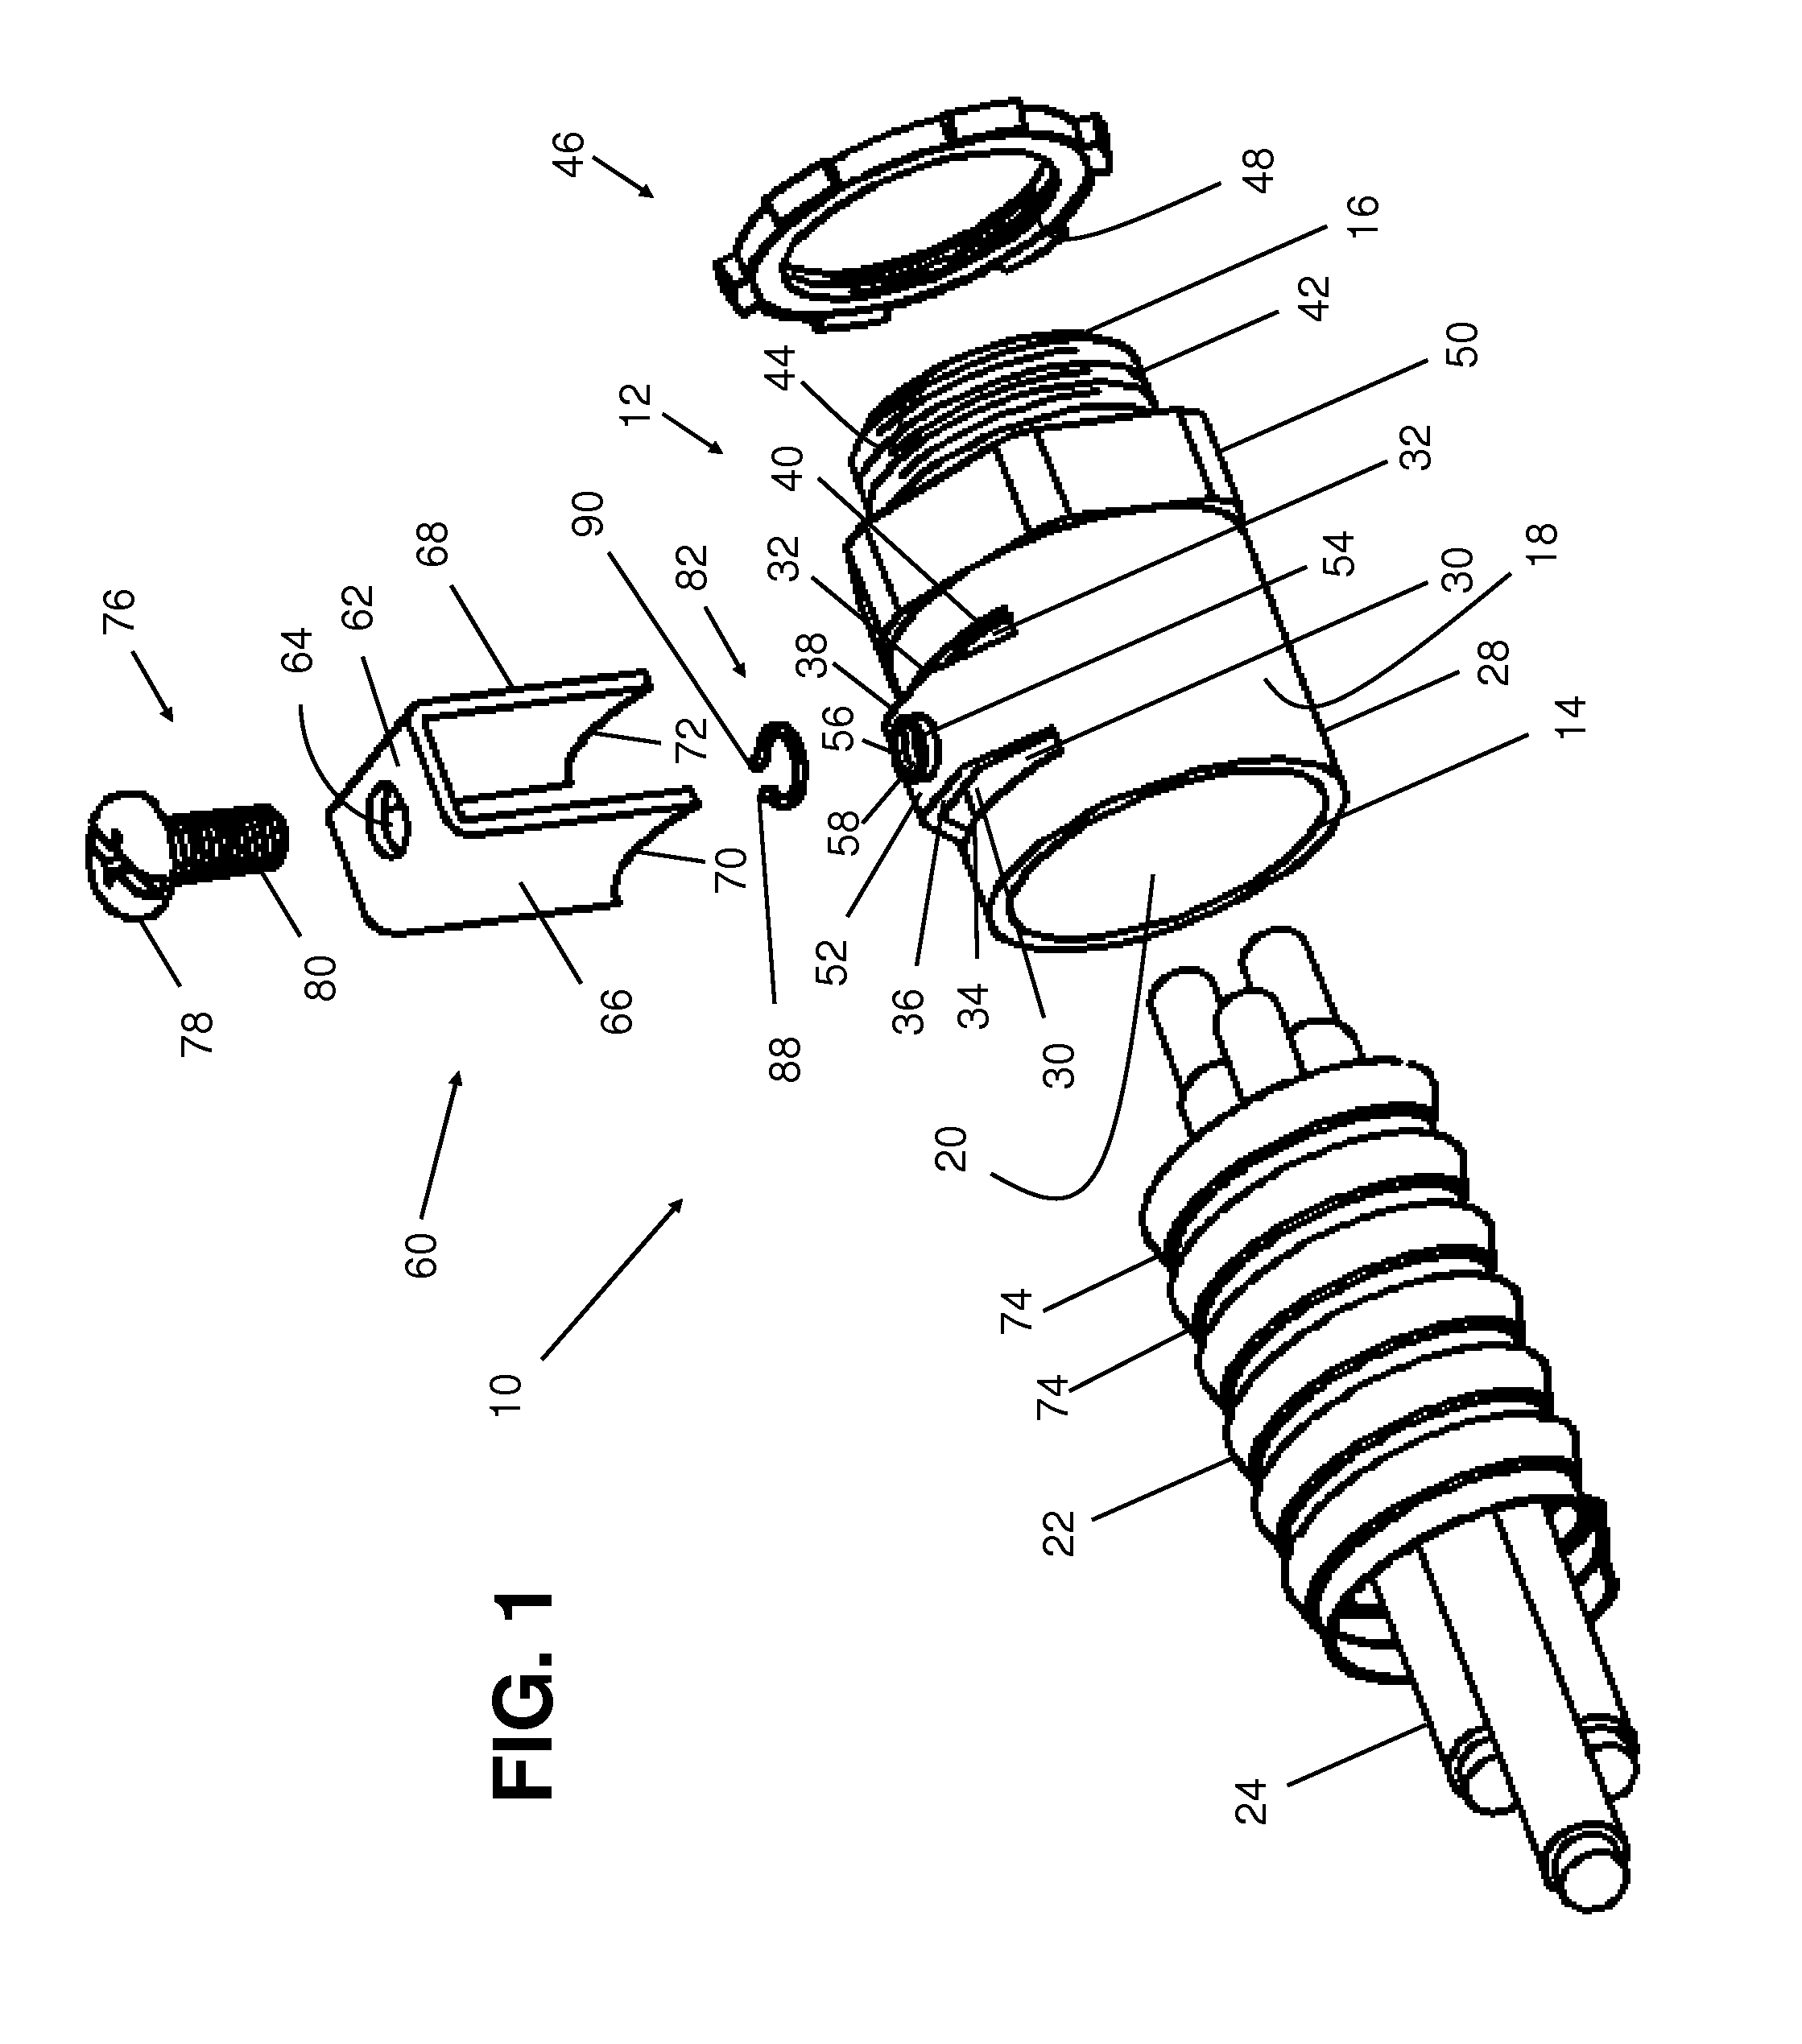 Electrical conduit connector with two-point engagement